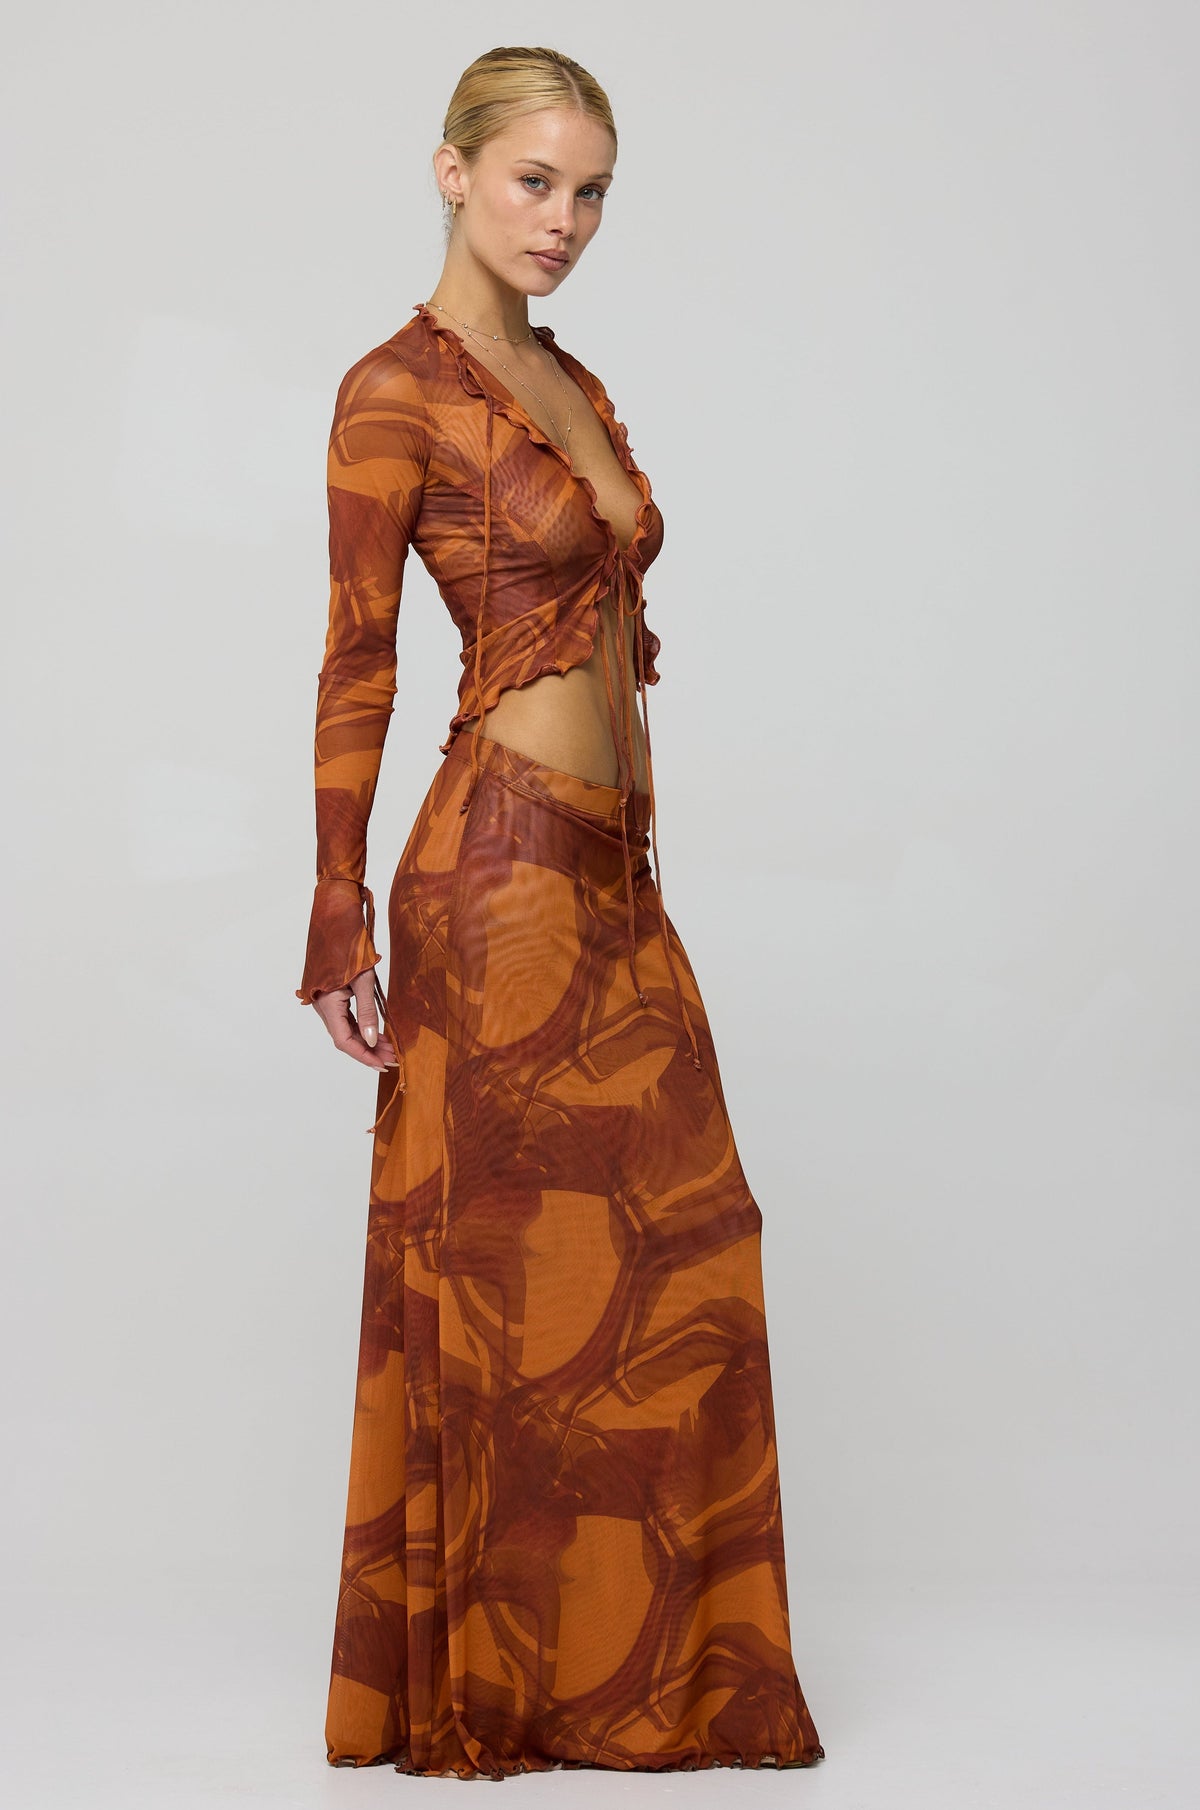 This is an image of Tezza Top in Flame - RESA featuring a model wearing the dress